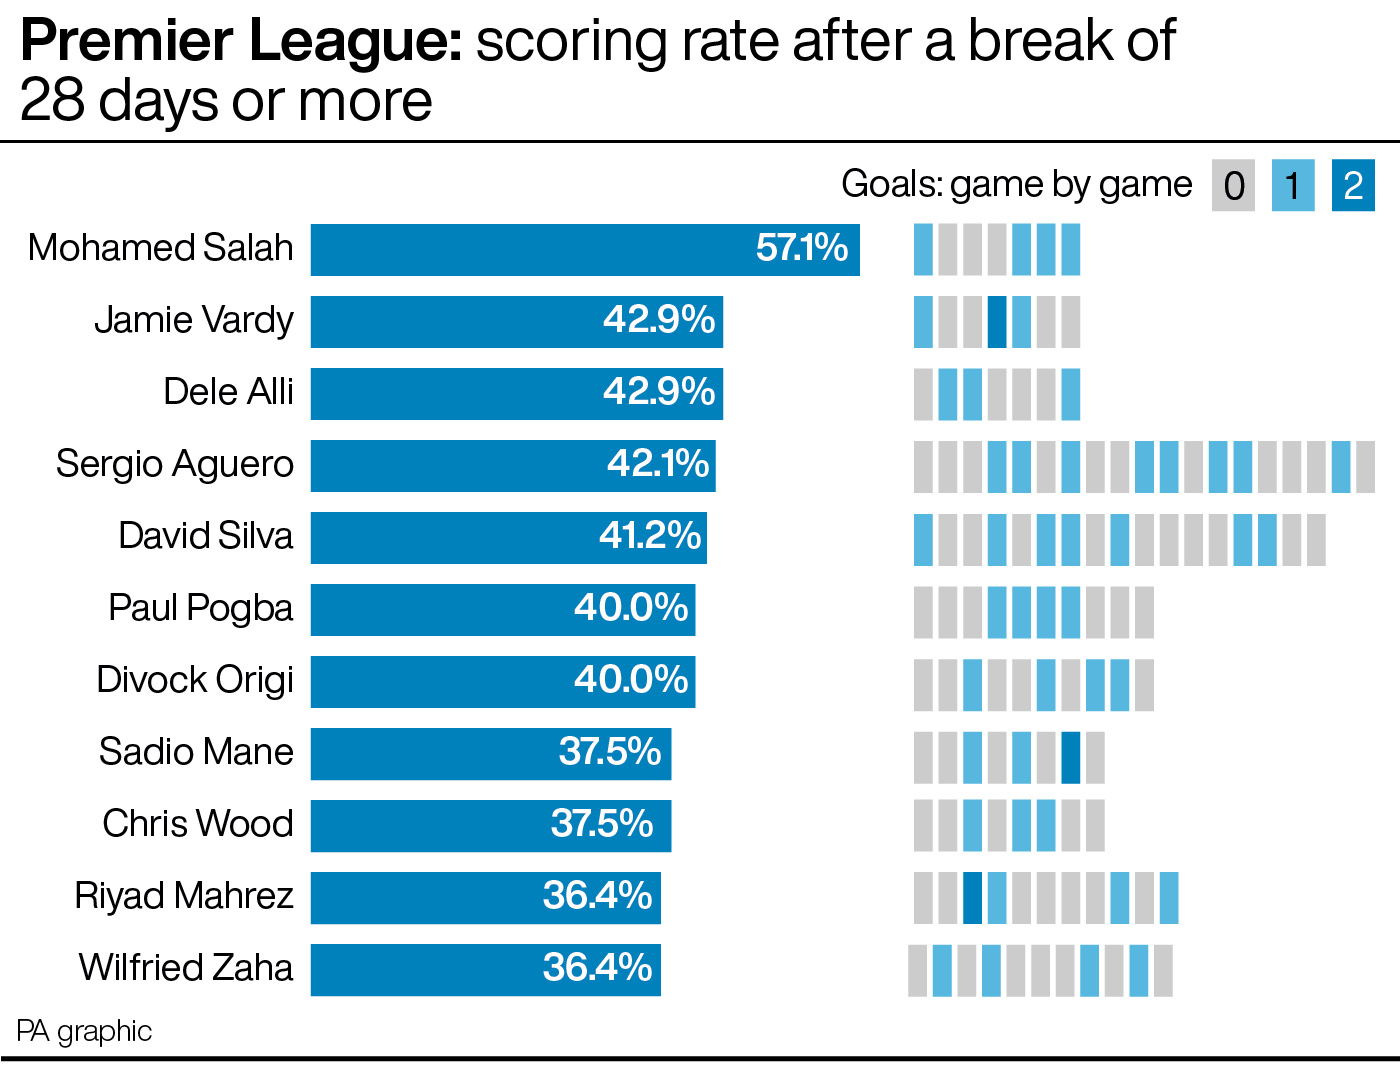 Premier League: scoring rate after a break of 28 days or more